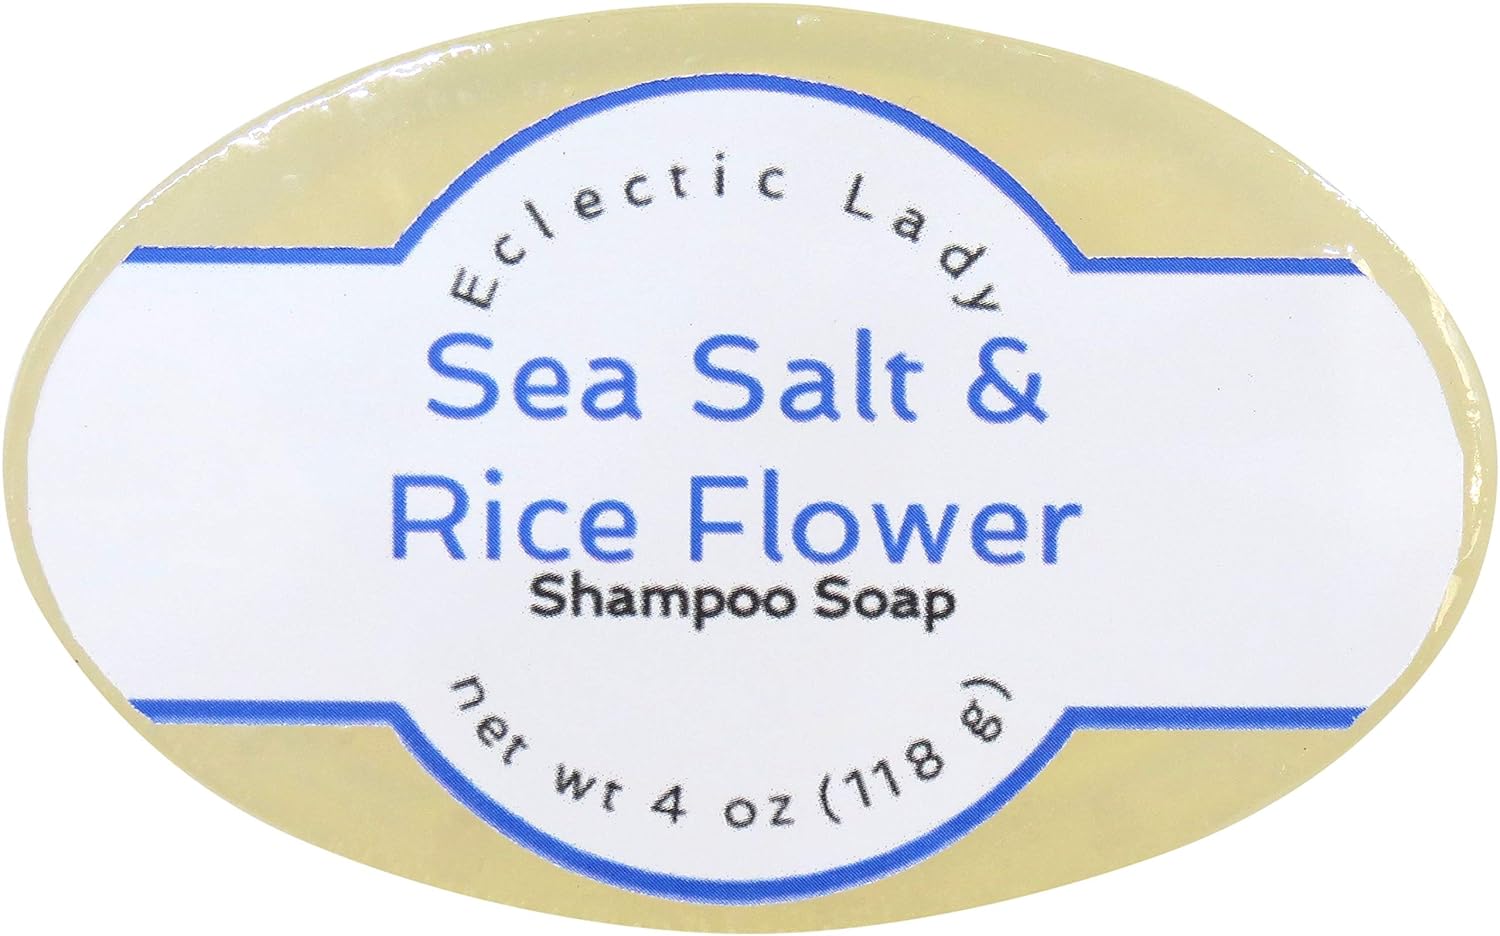 Eclectic Lady Sea Salt and Rice ower Shampoo Soap Bar with Pure Argan Oil, Silk Protein, Honey Protein and Extracts of Calendula ower, Aloe, Carrageenan, Sunower - 4  Bar